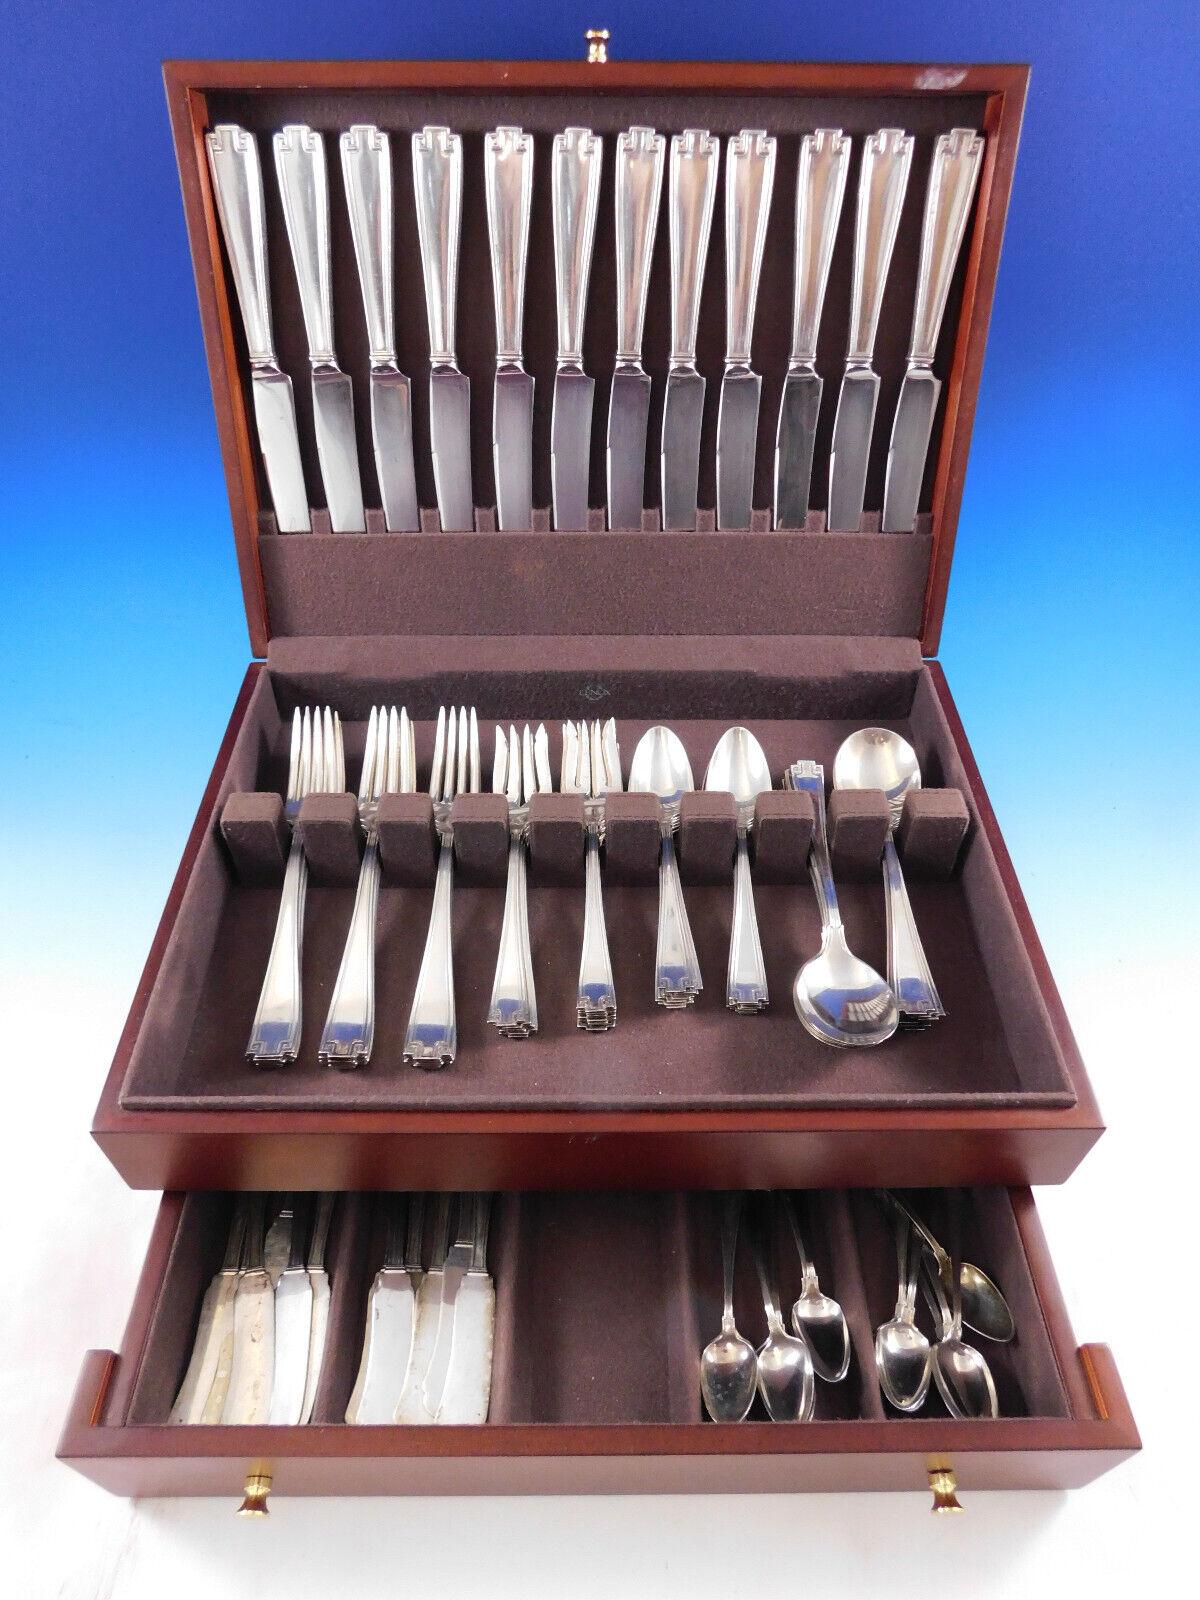 Vintage Gorham sterling silver flatware set in the Etruscan pattern featuring an Art Deco style Greek Key design. Although this pattern was released in the year 1913, one can see that it was a forerunner for the Art Deco designs that would follow